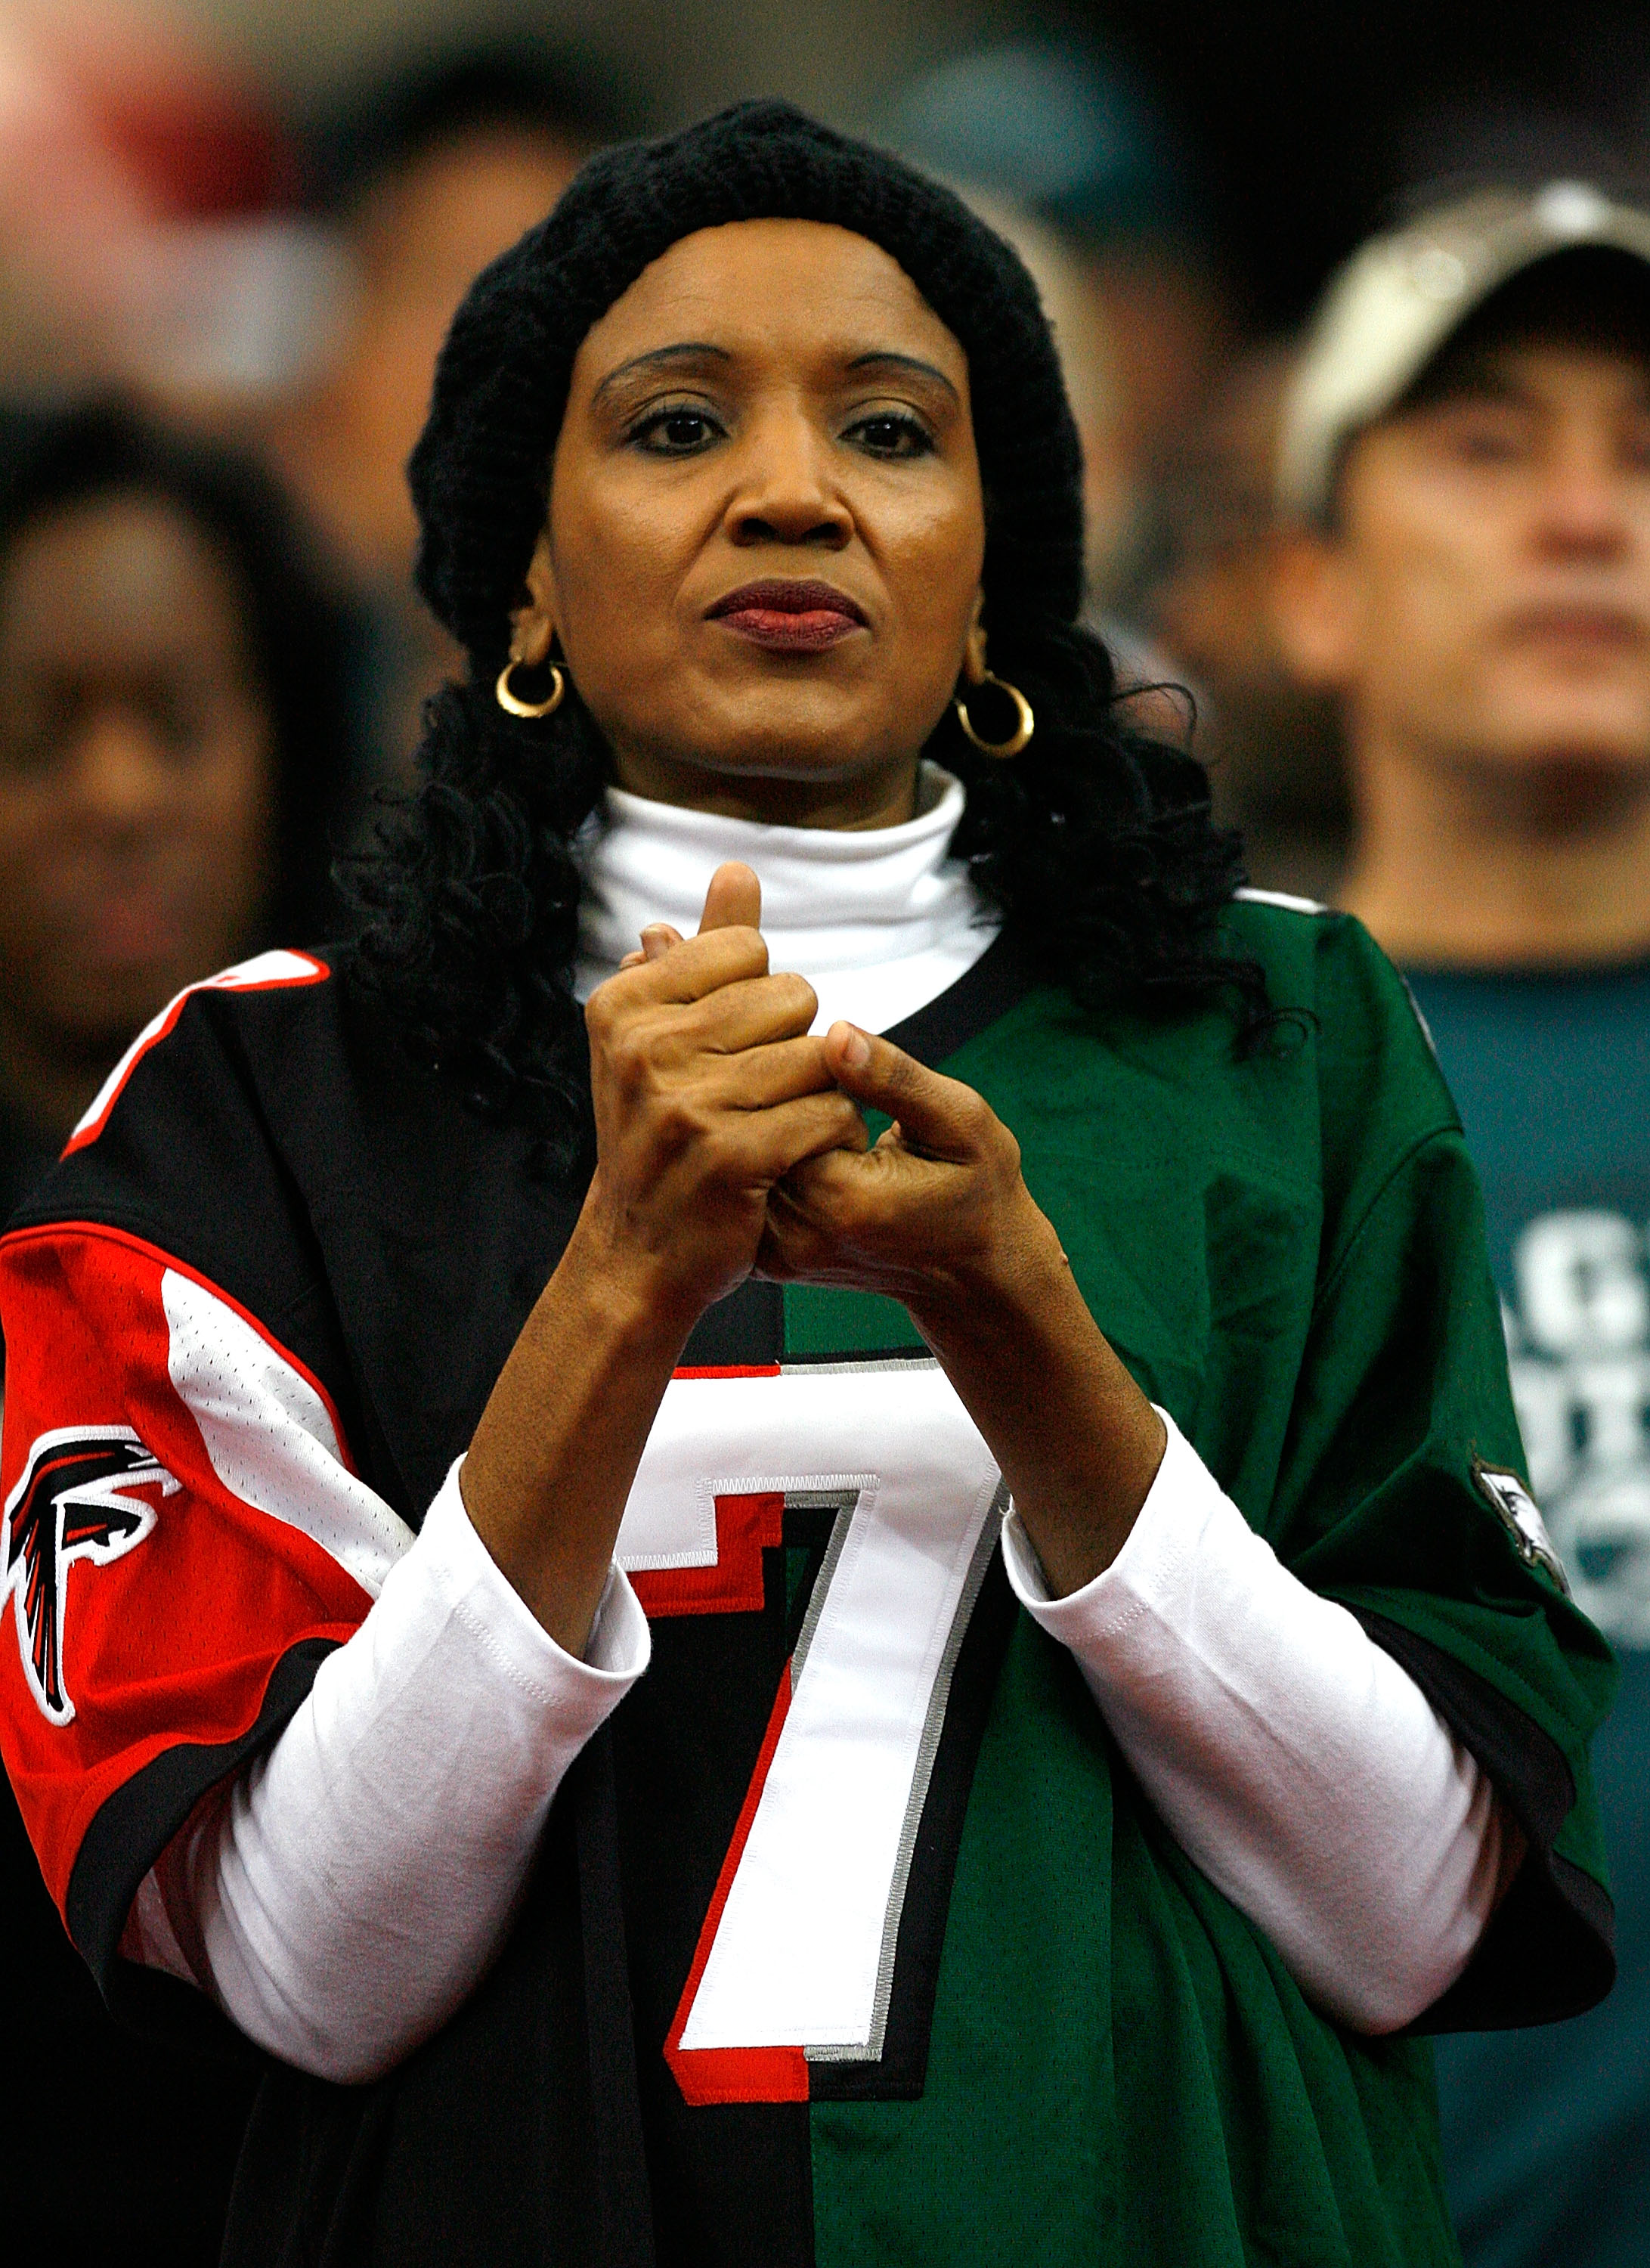 Image result for fans wearing vick eagles and falcons jersey